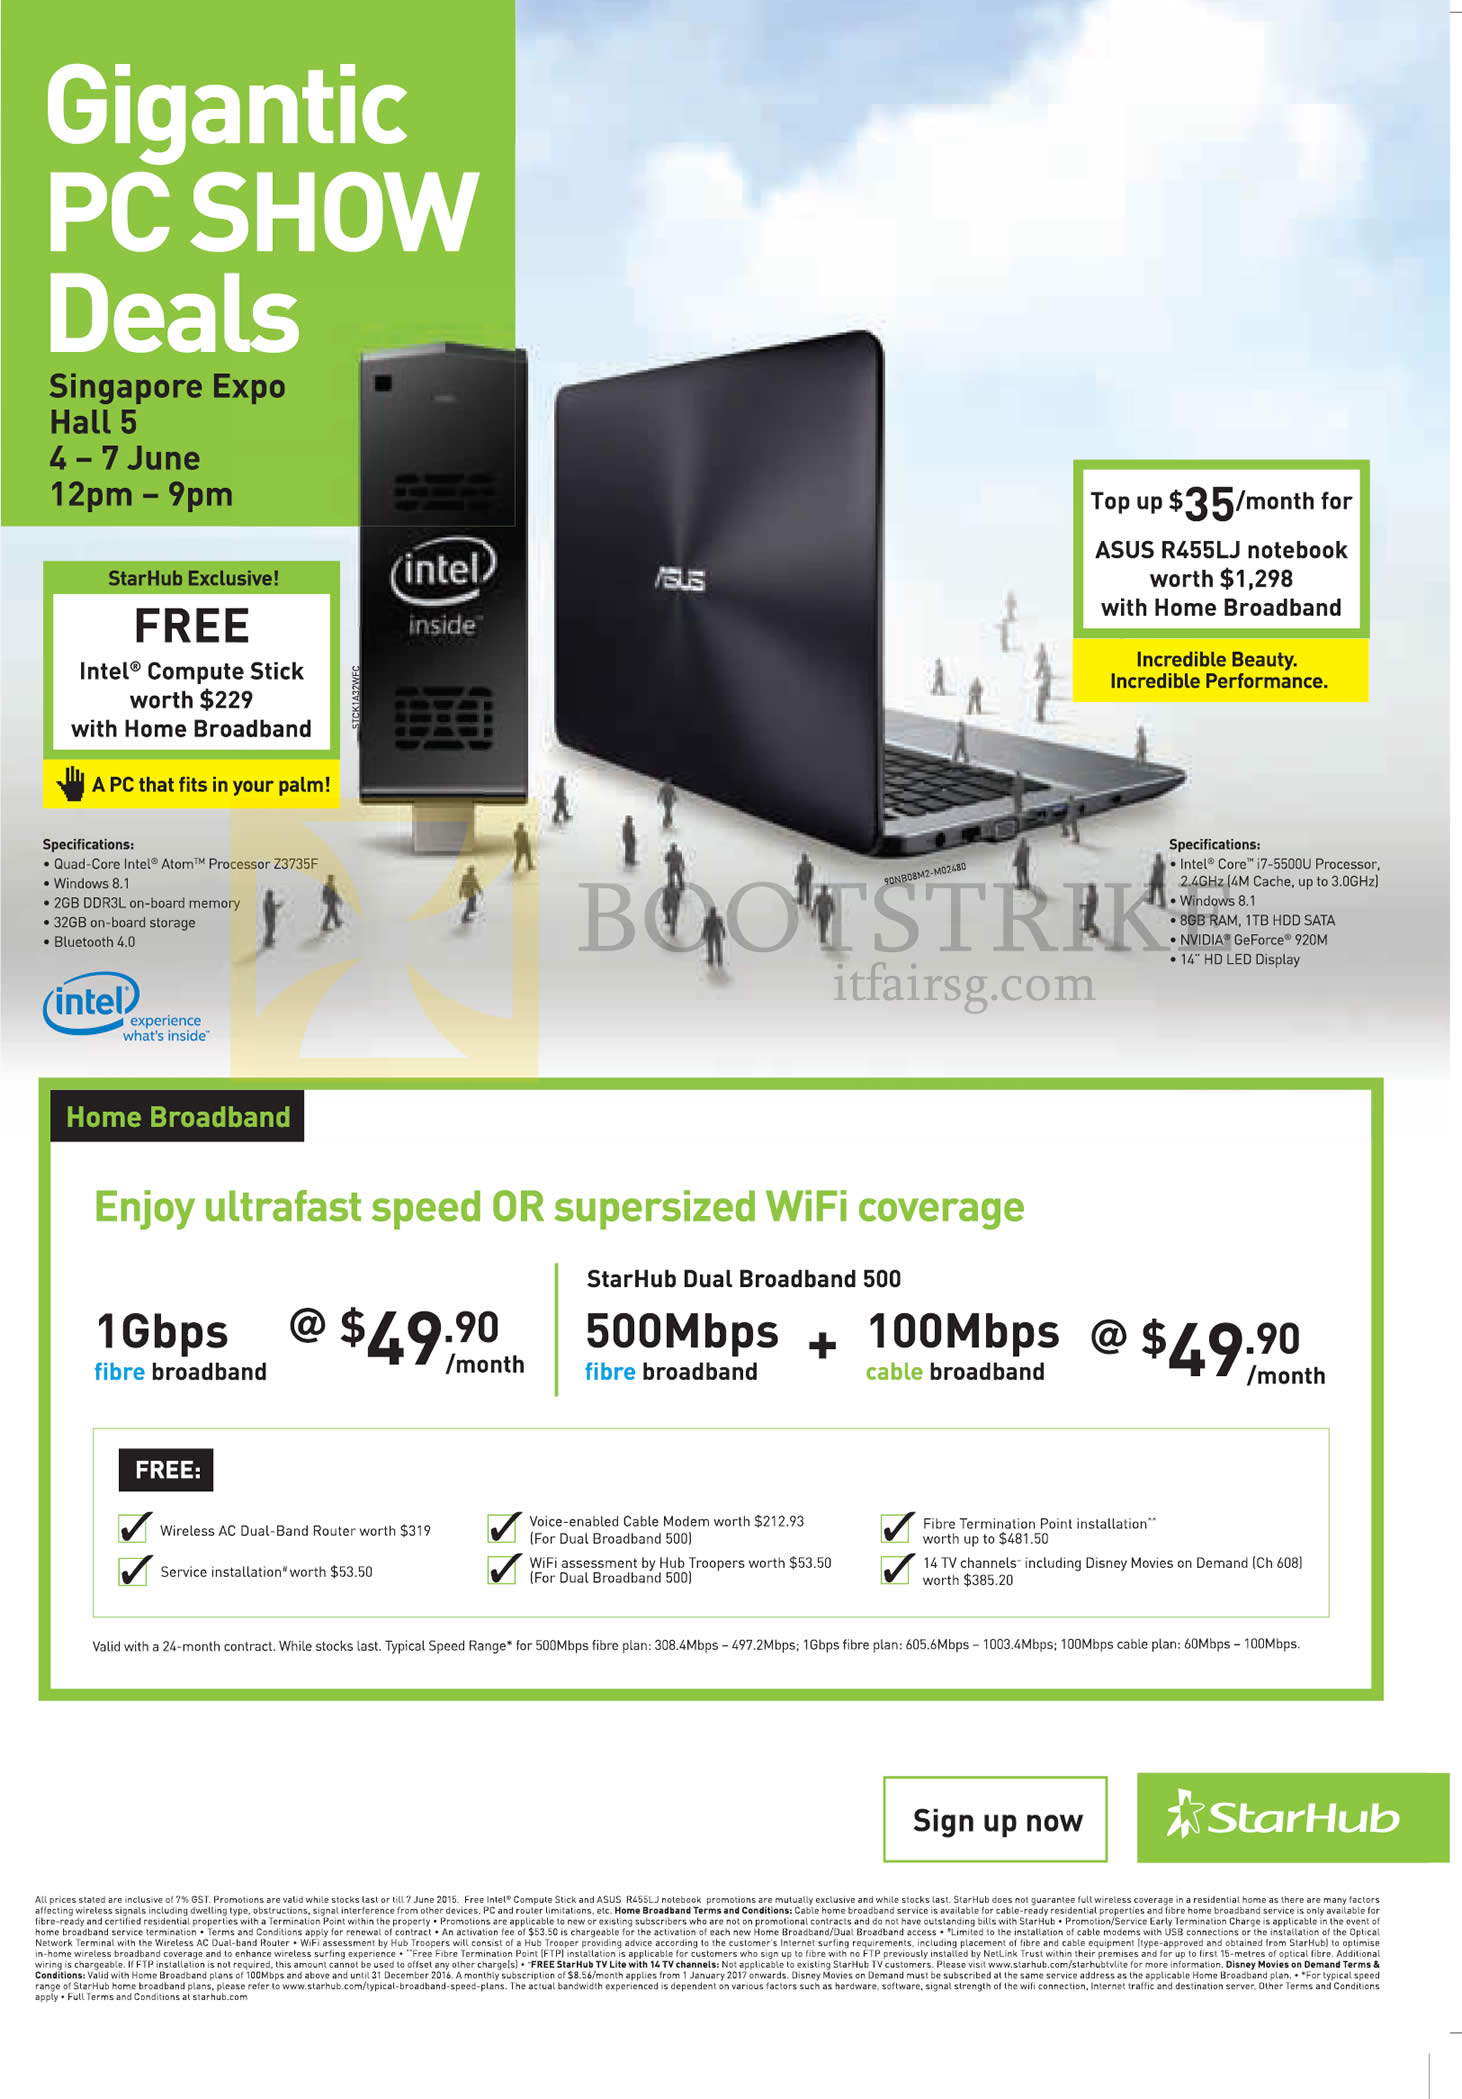 Featured image for Starhub PC SHOW 2015 Broadband, Mobile, Cable TV & Other Offers 4 - 7 Jun 2015